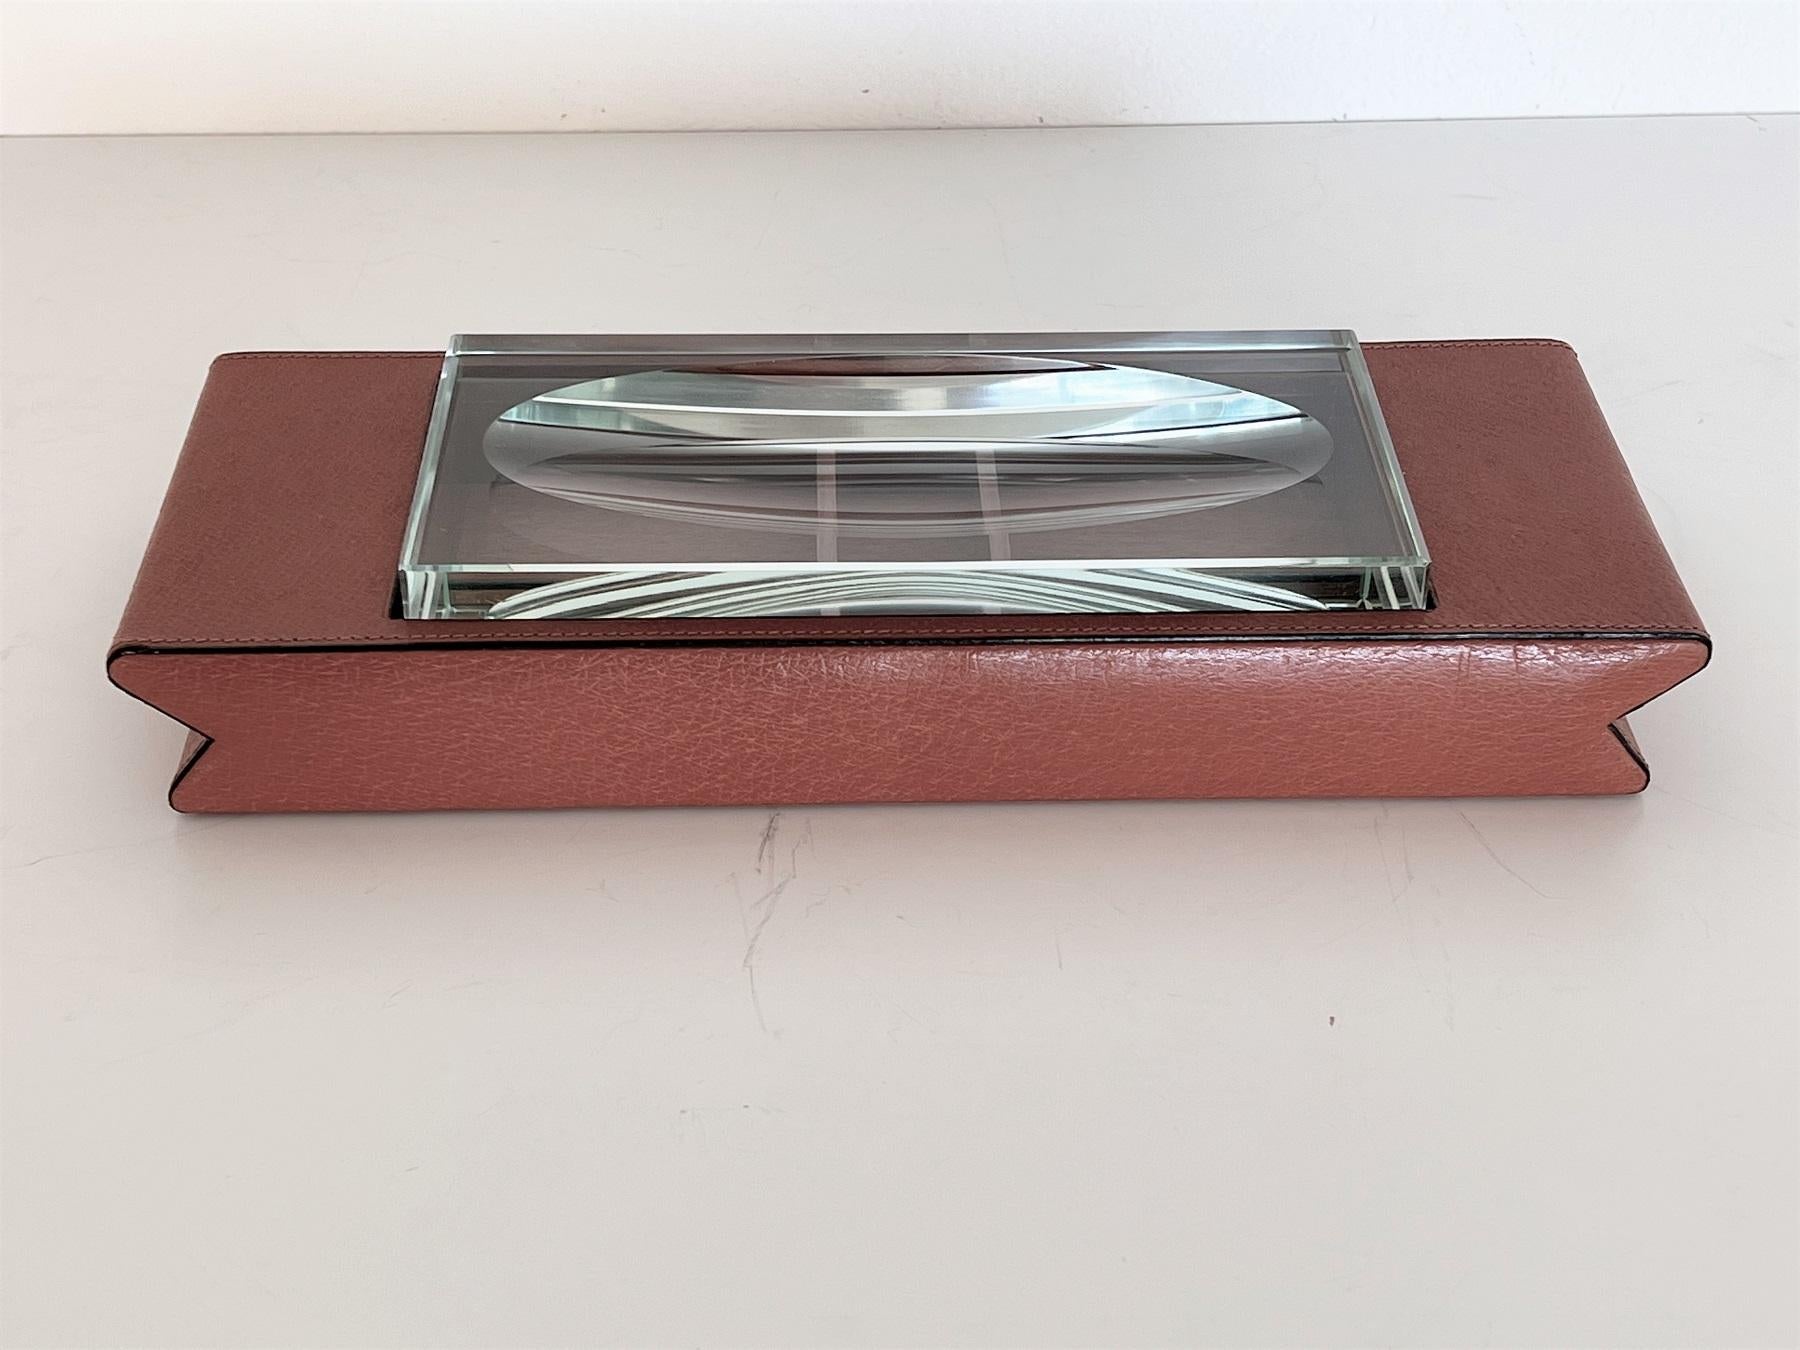 Late 20th Century Italian Desk Box in Leather and Cut Glass, 1970s For Sale